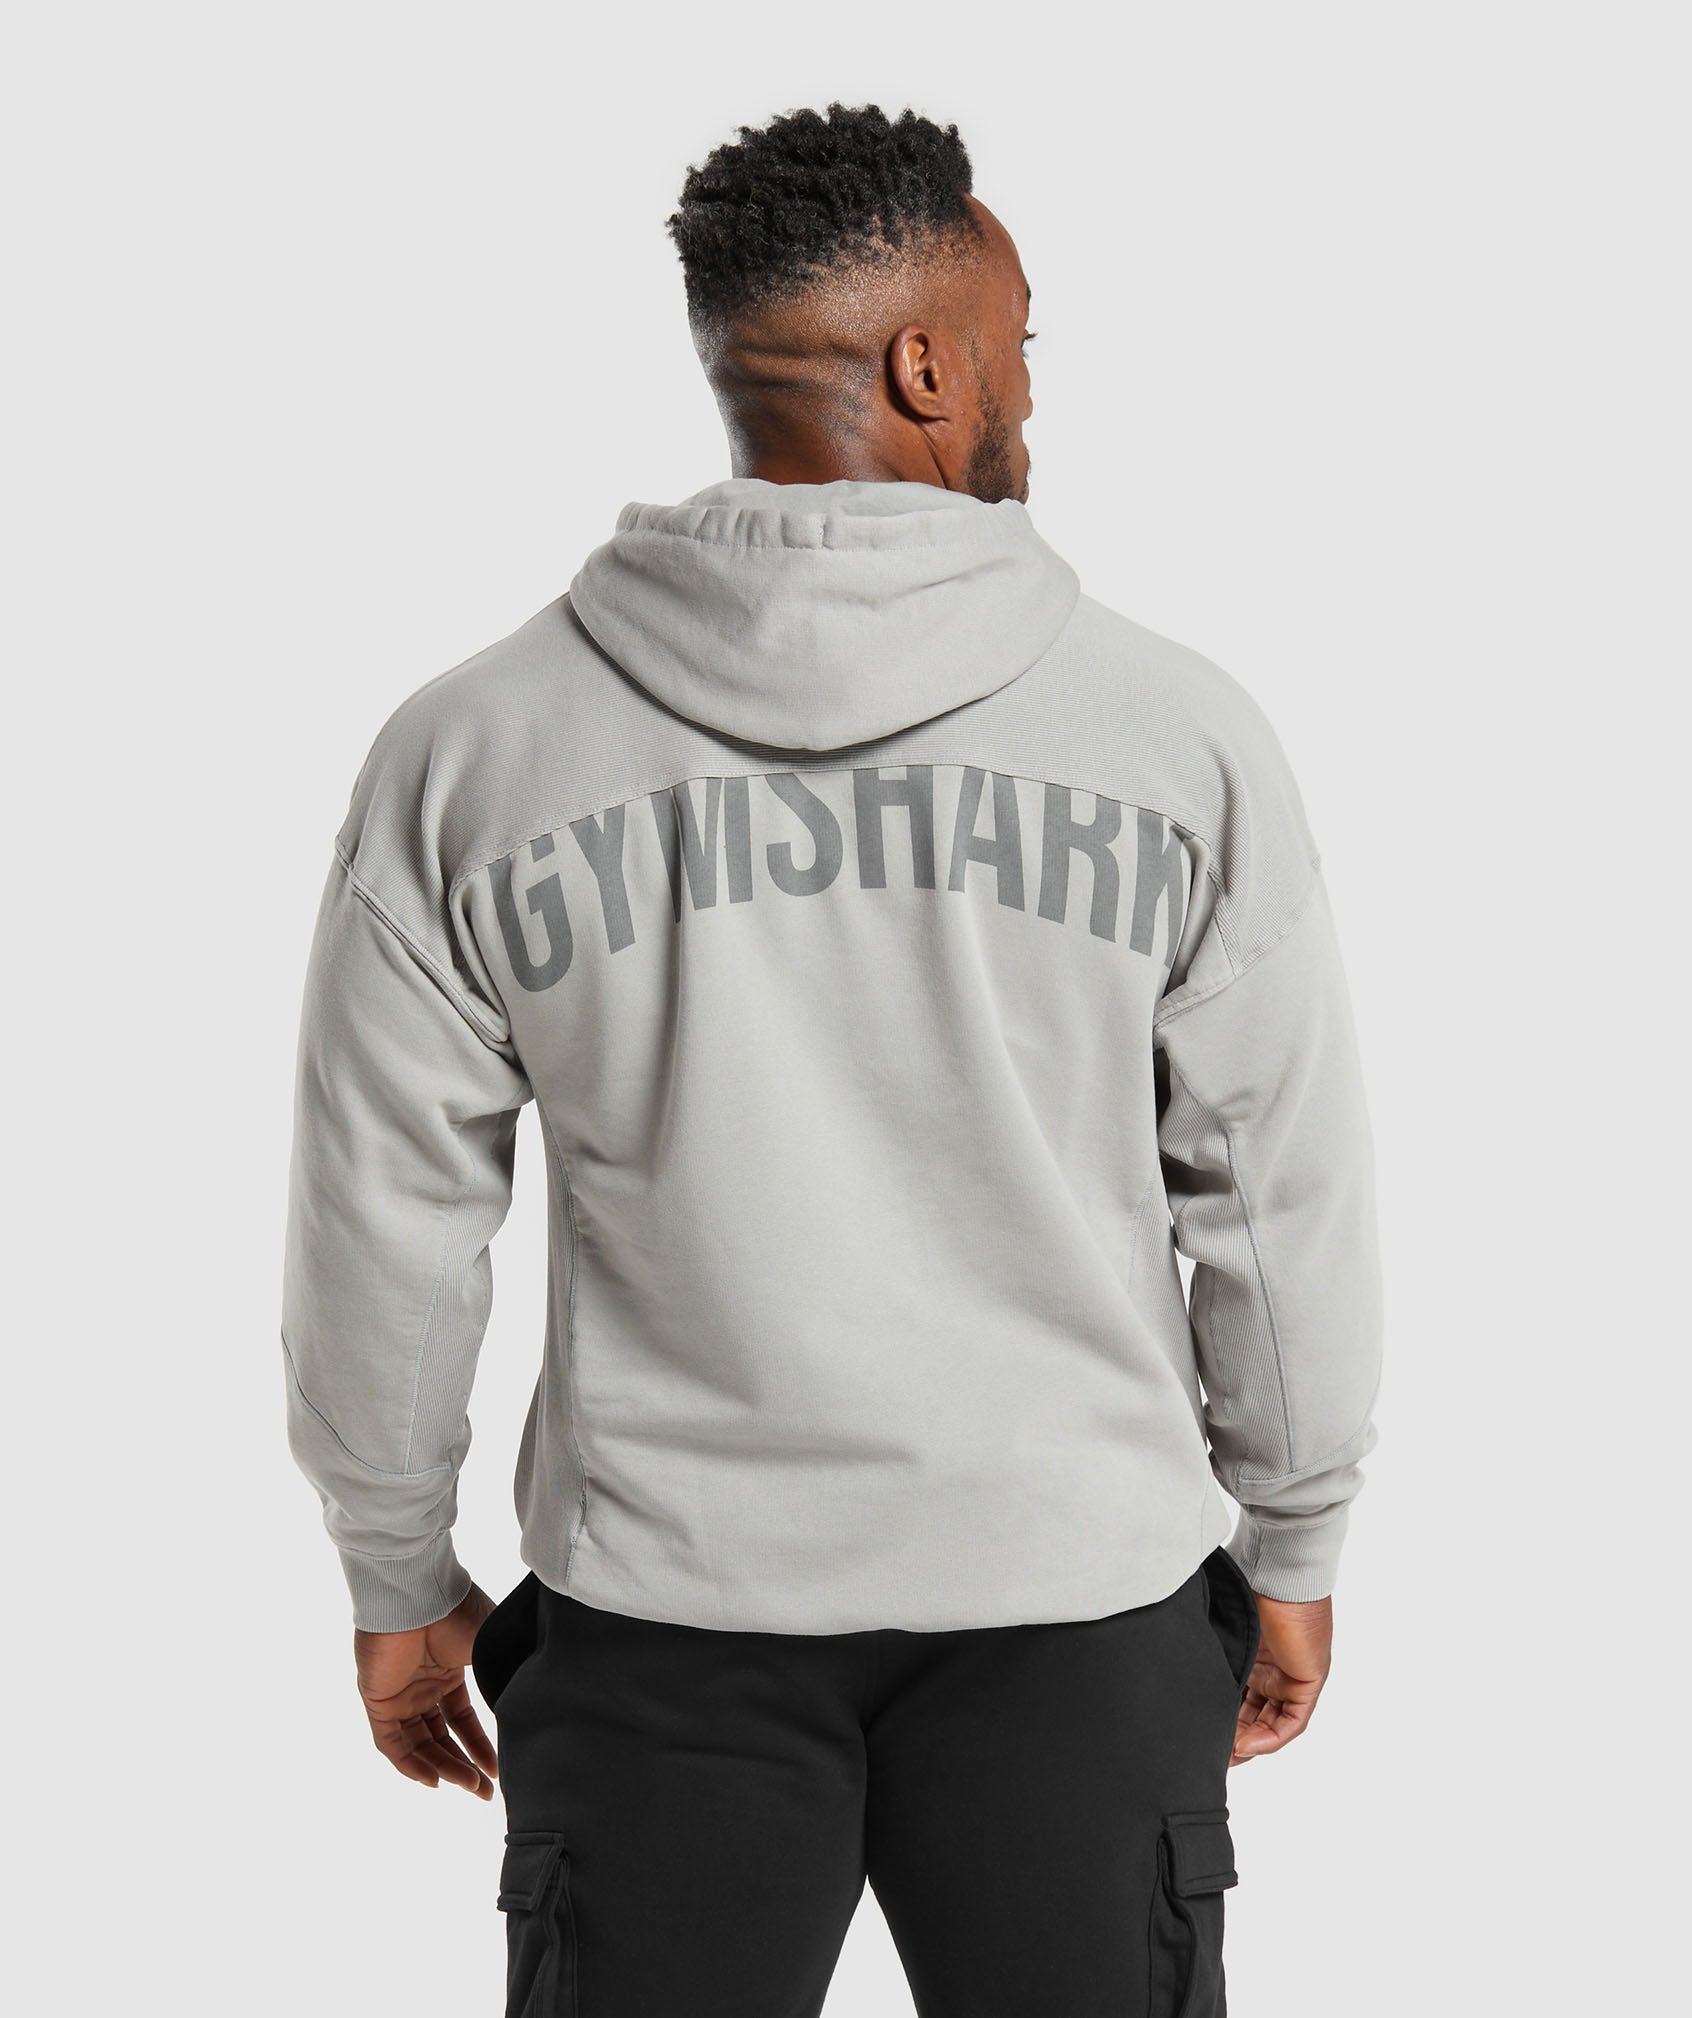 New Gymshark Releases  Latest Designs in Activewear